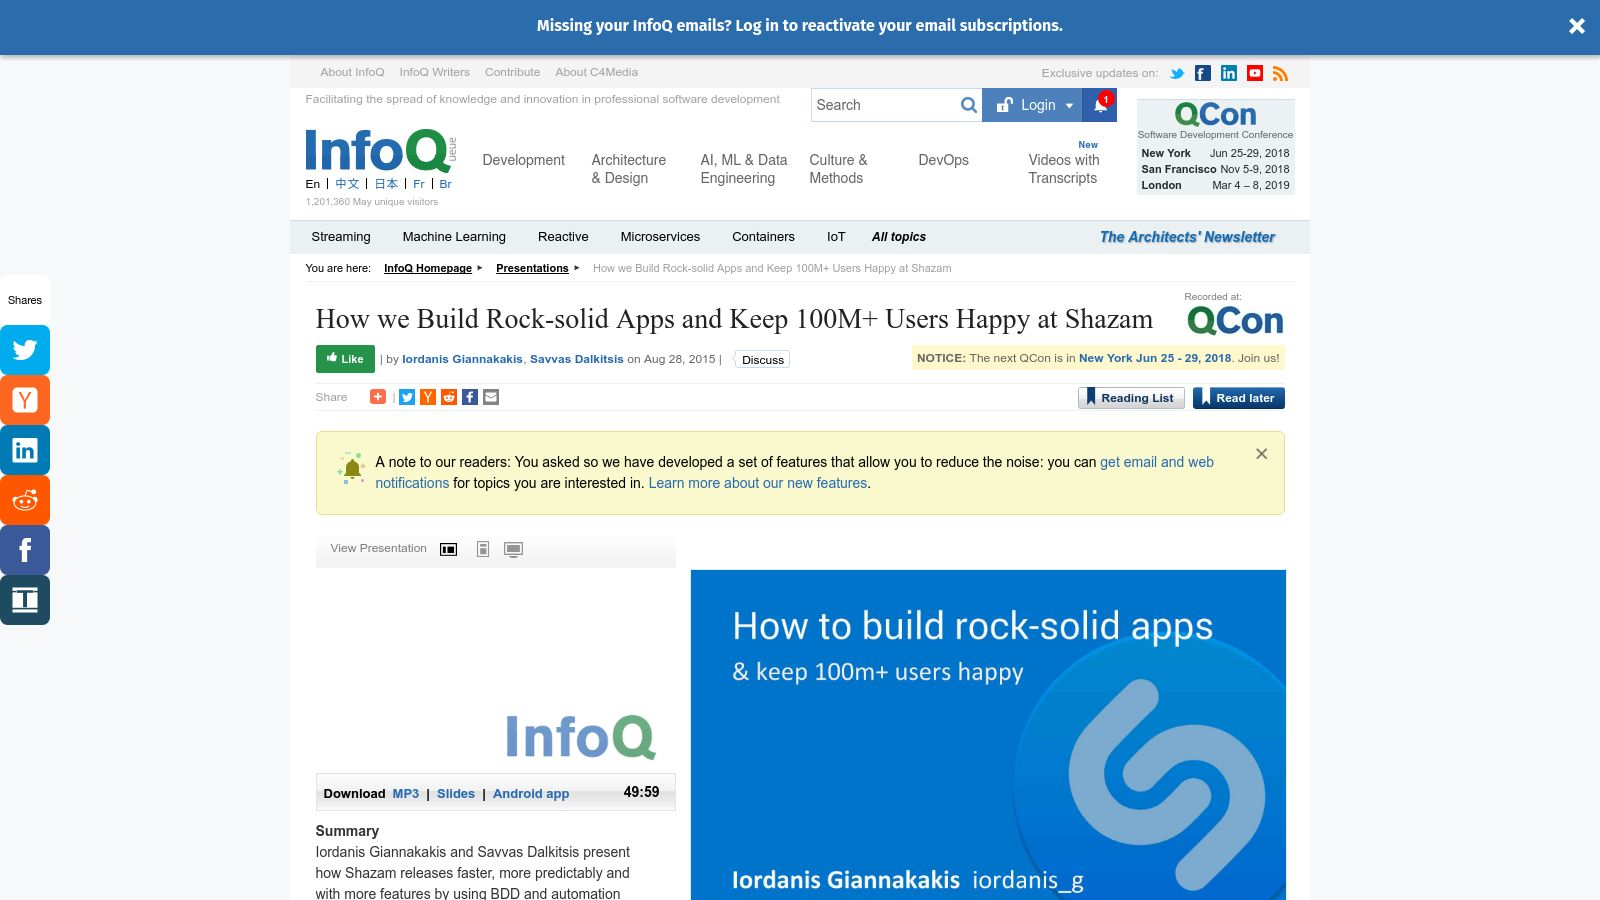 How we Build Rock-solid Apps and Keep 100M+ Users Happy at Shazam